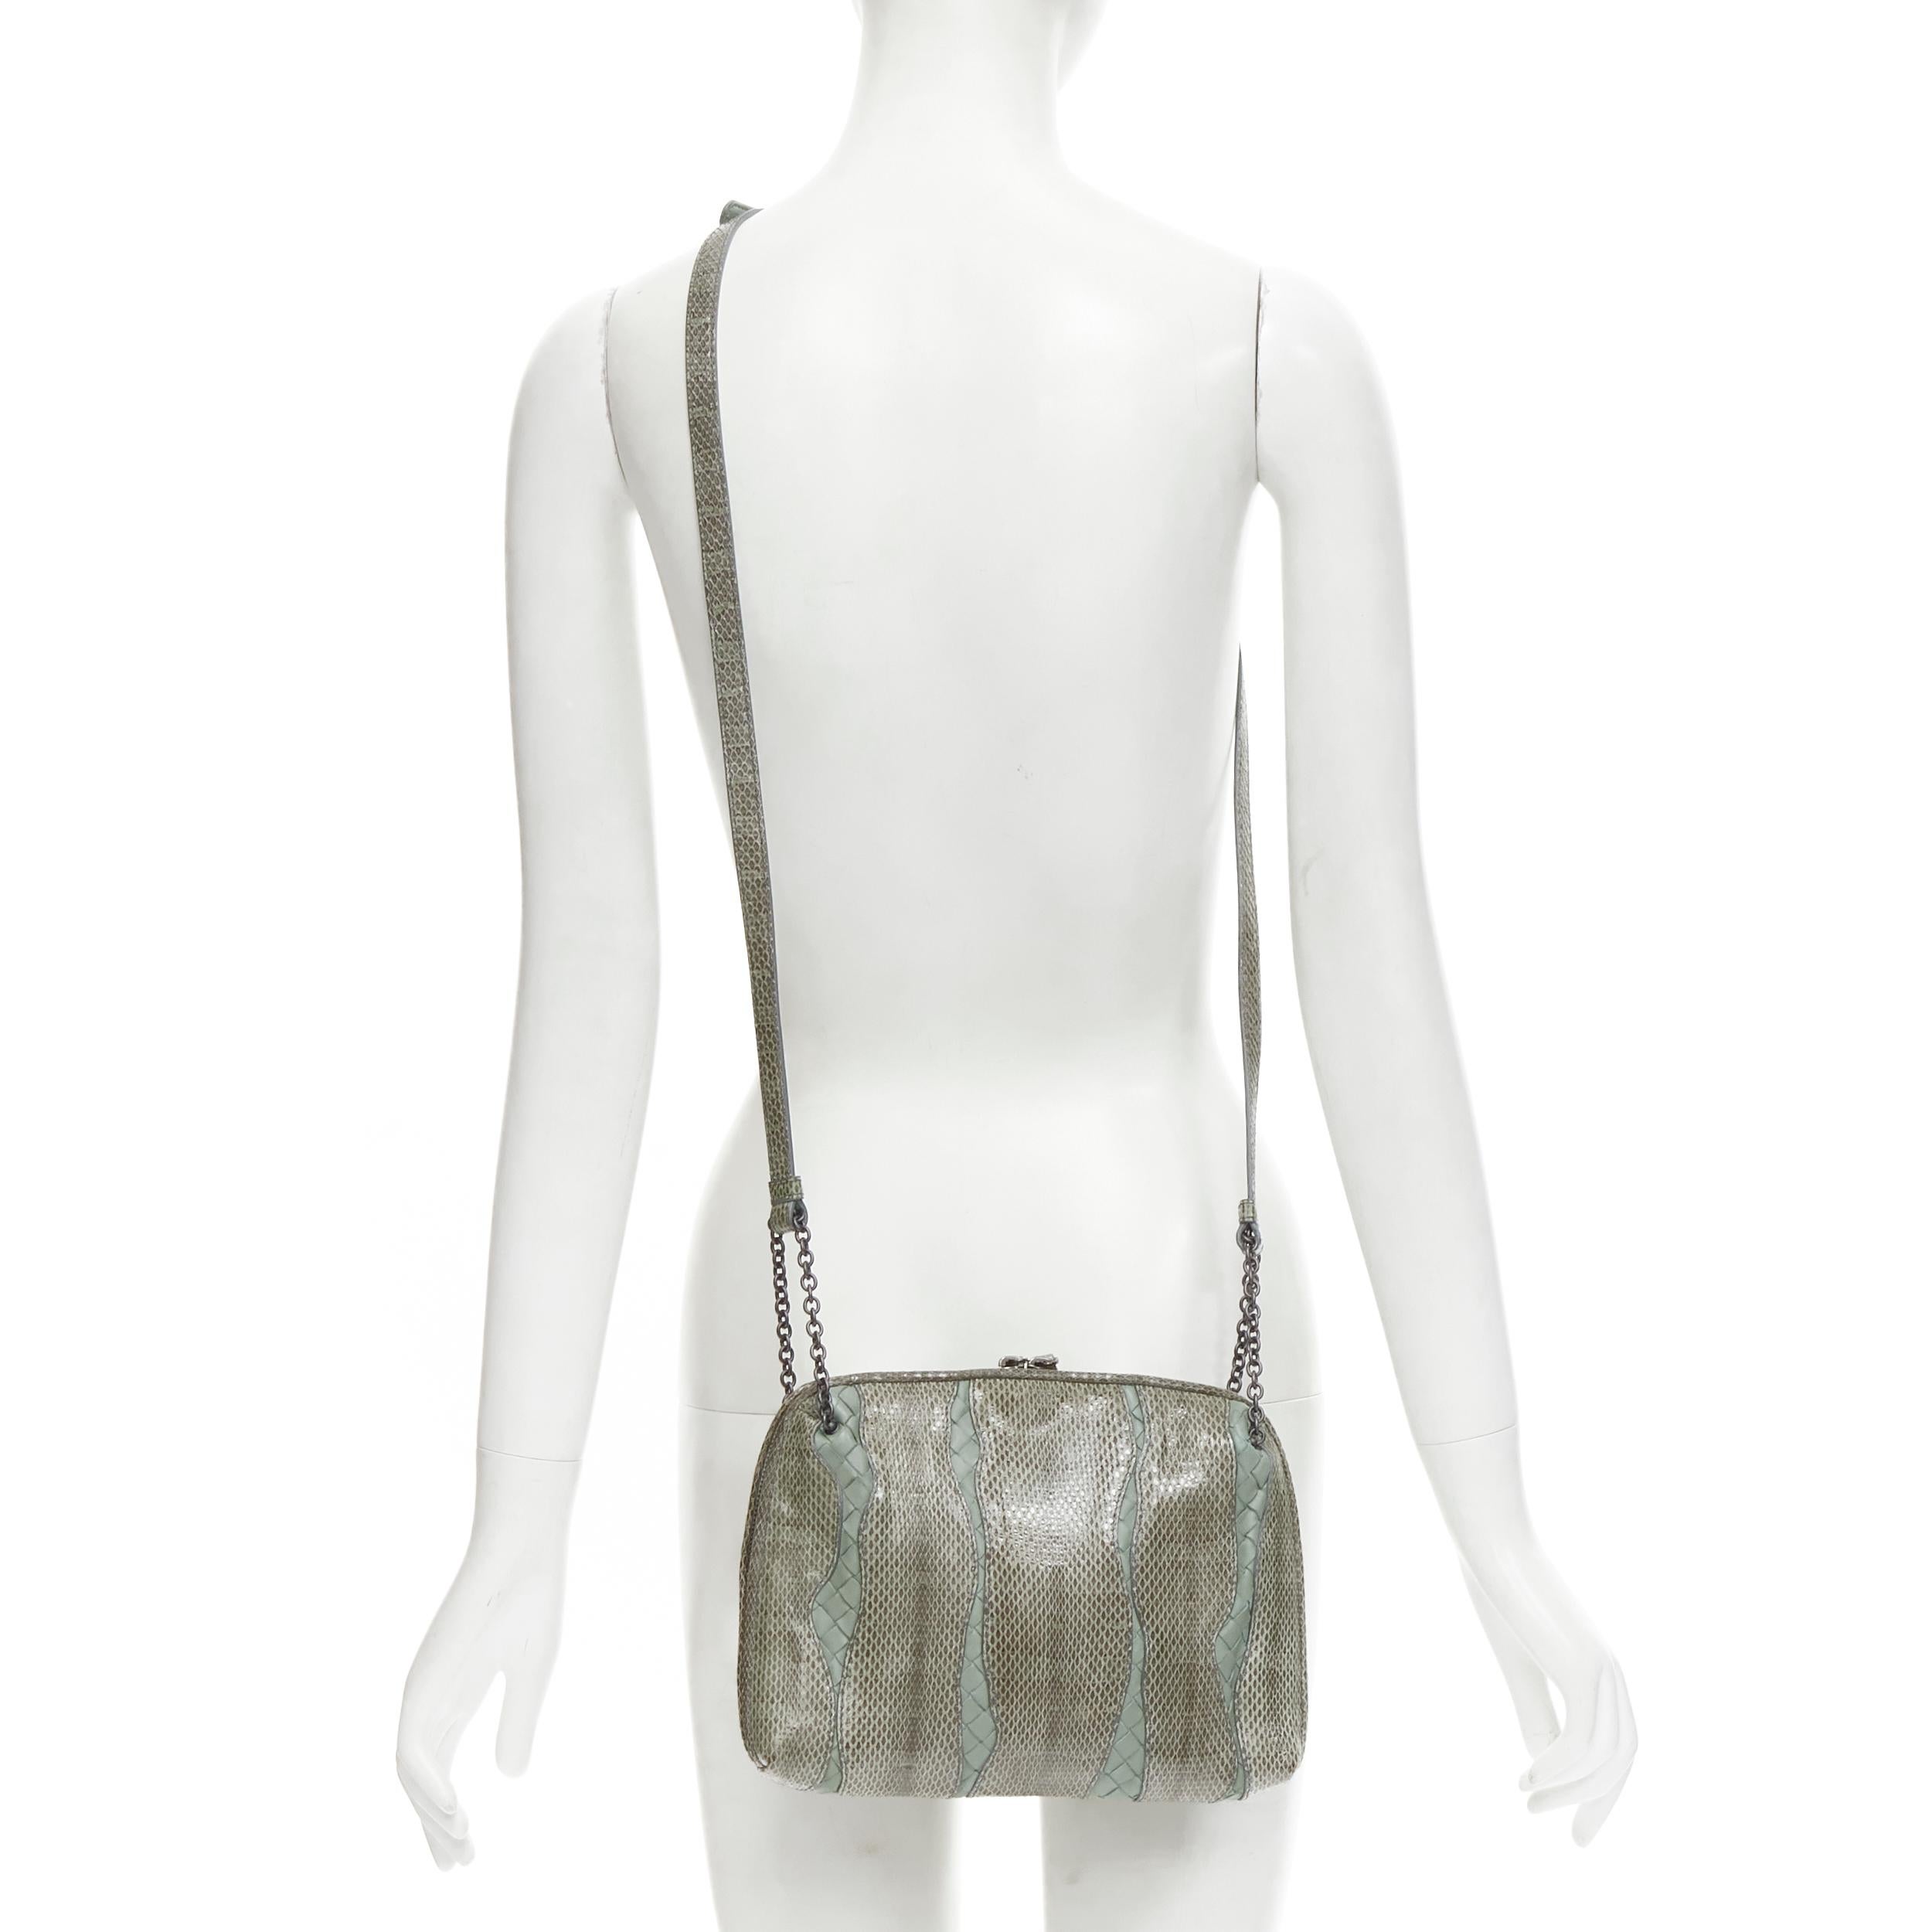 BOTTEGA VENETA Ayers watersnake green Intrecciato woven top zip crossbody bag
Reference: TGAS/C00002
Brand: Bottega Veneta
Material: Leather
Color: Blue
Closure: Zip
Lining: Suede
Extra Details: Ayers watersnake glossy leather. 